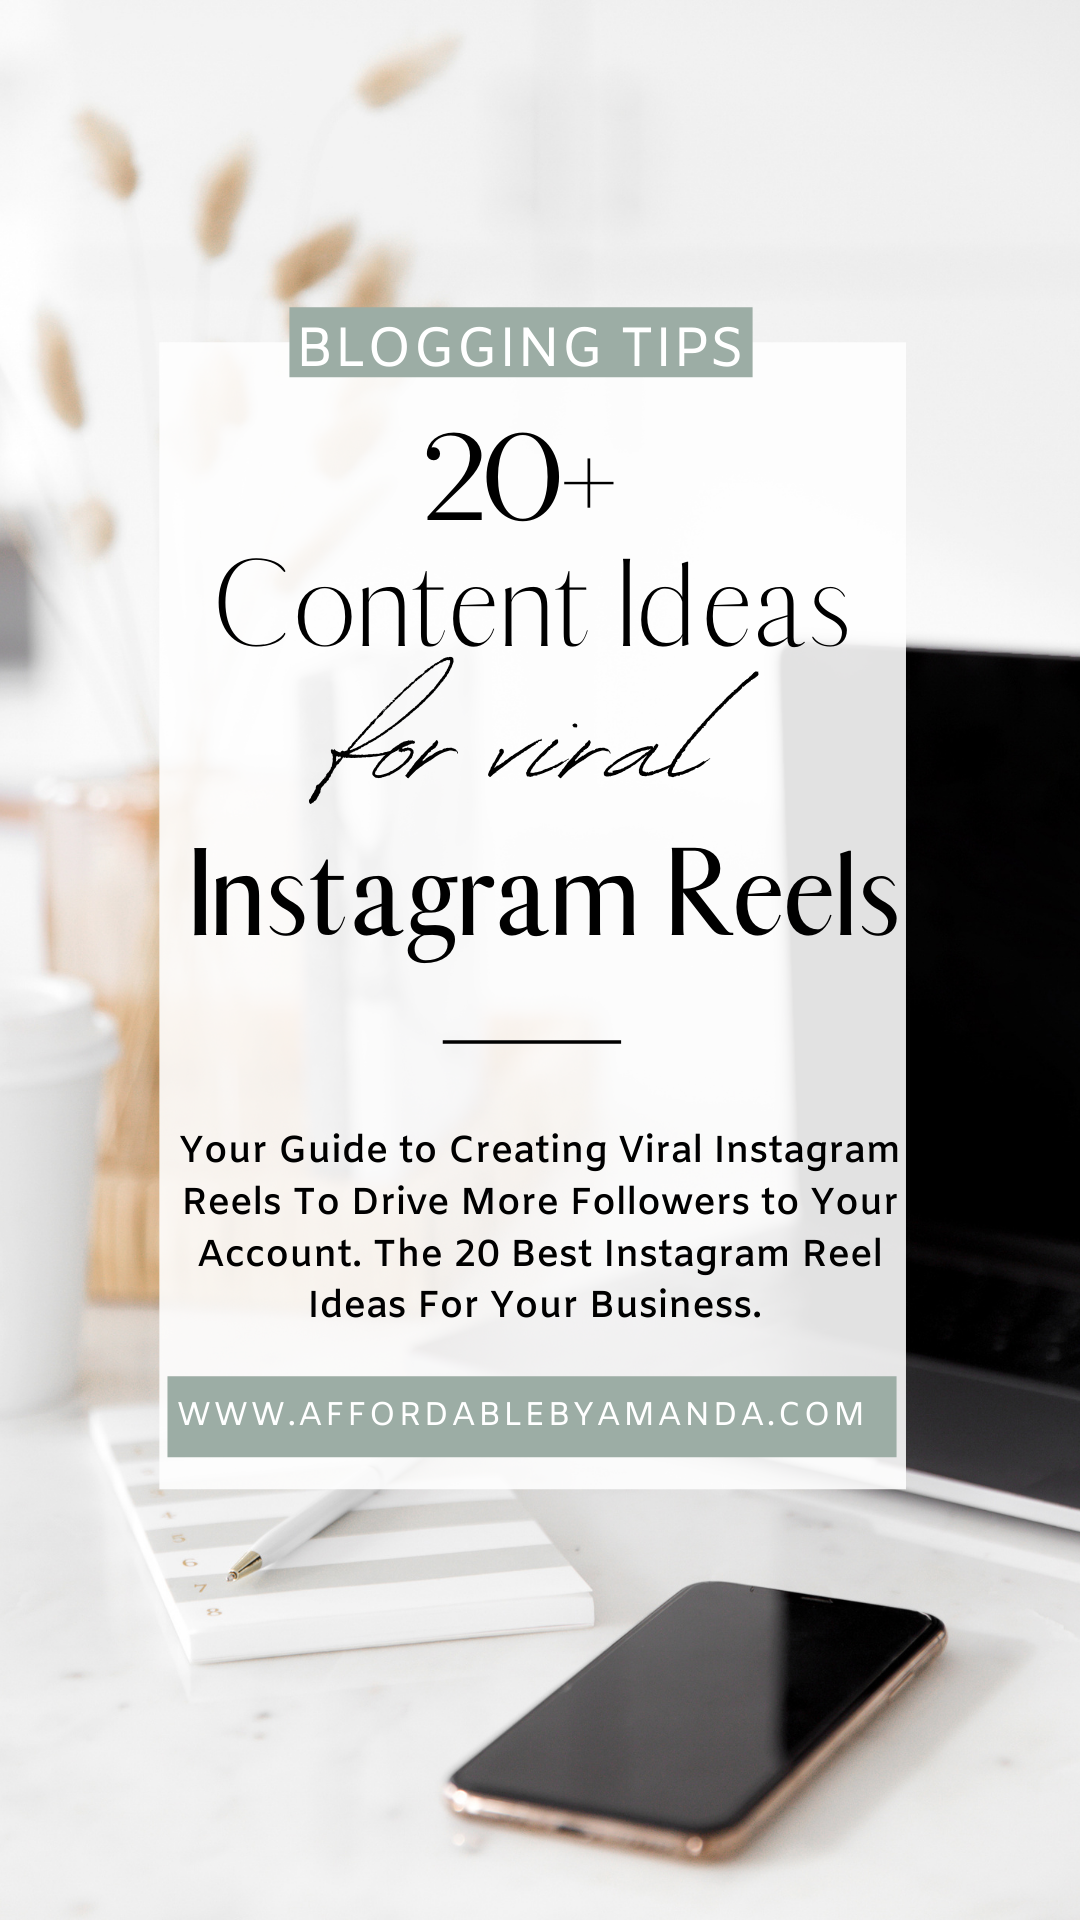 20 Content Ideas for Instagram Reels in 2021 - Affordable by Amanda